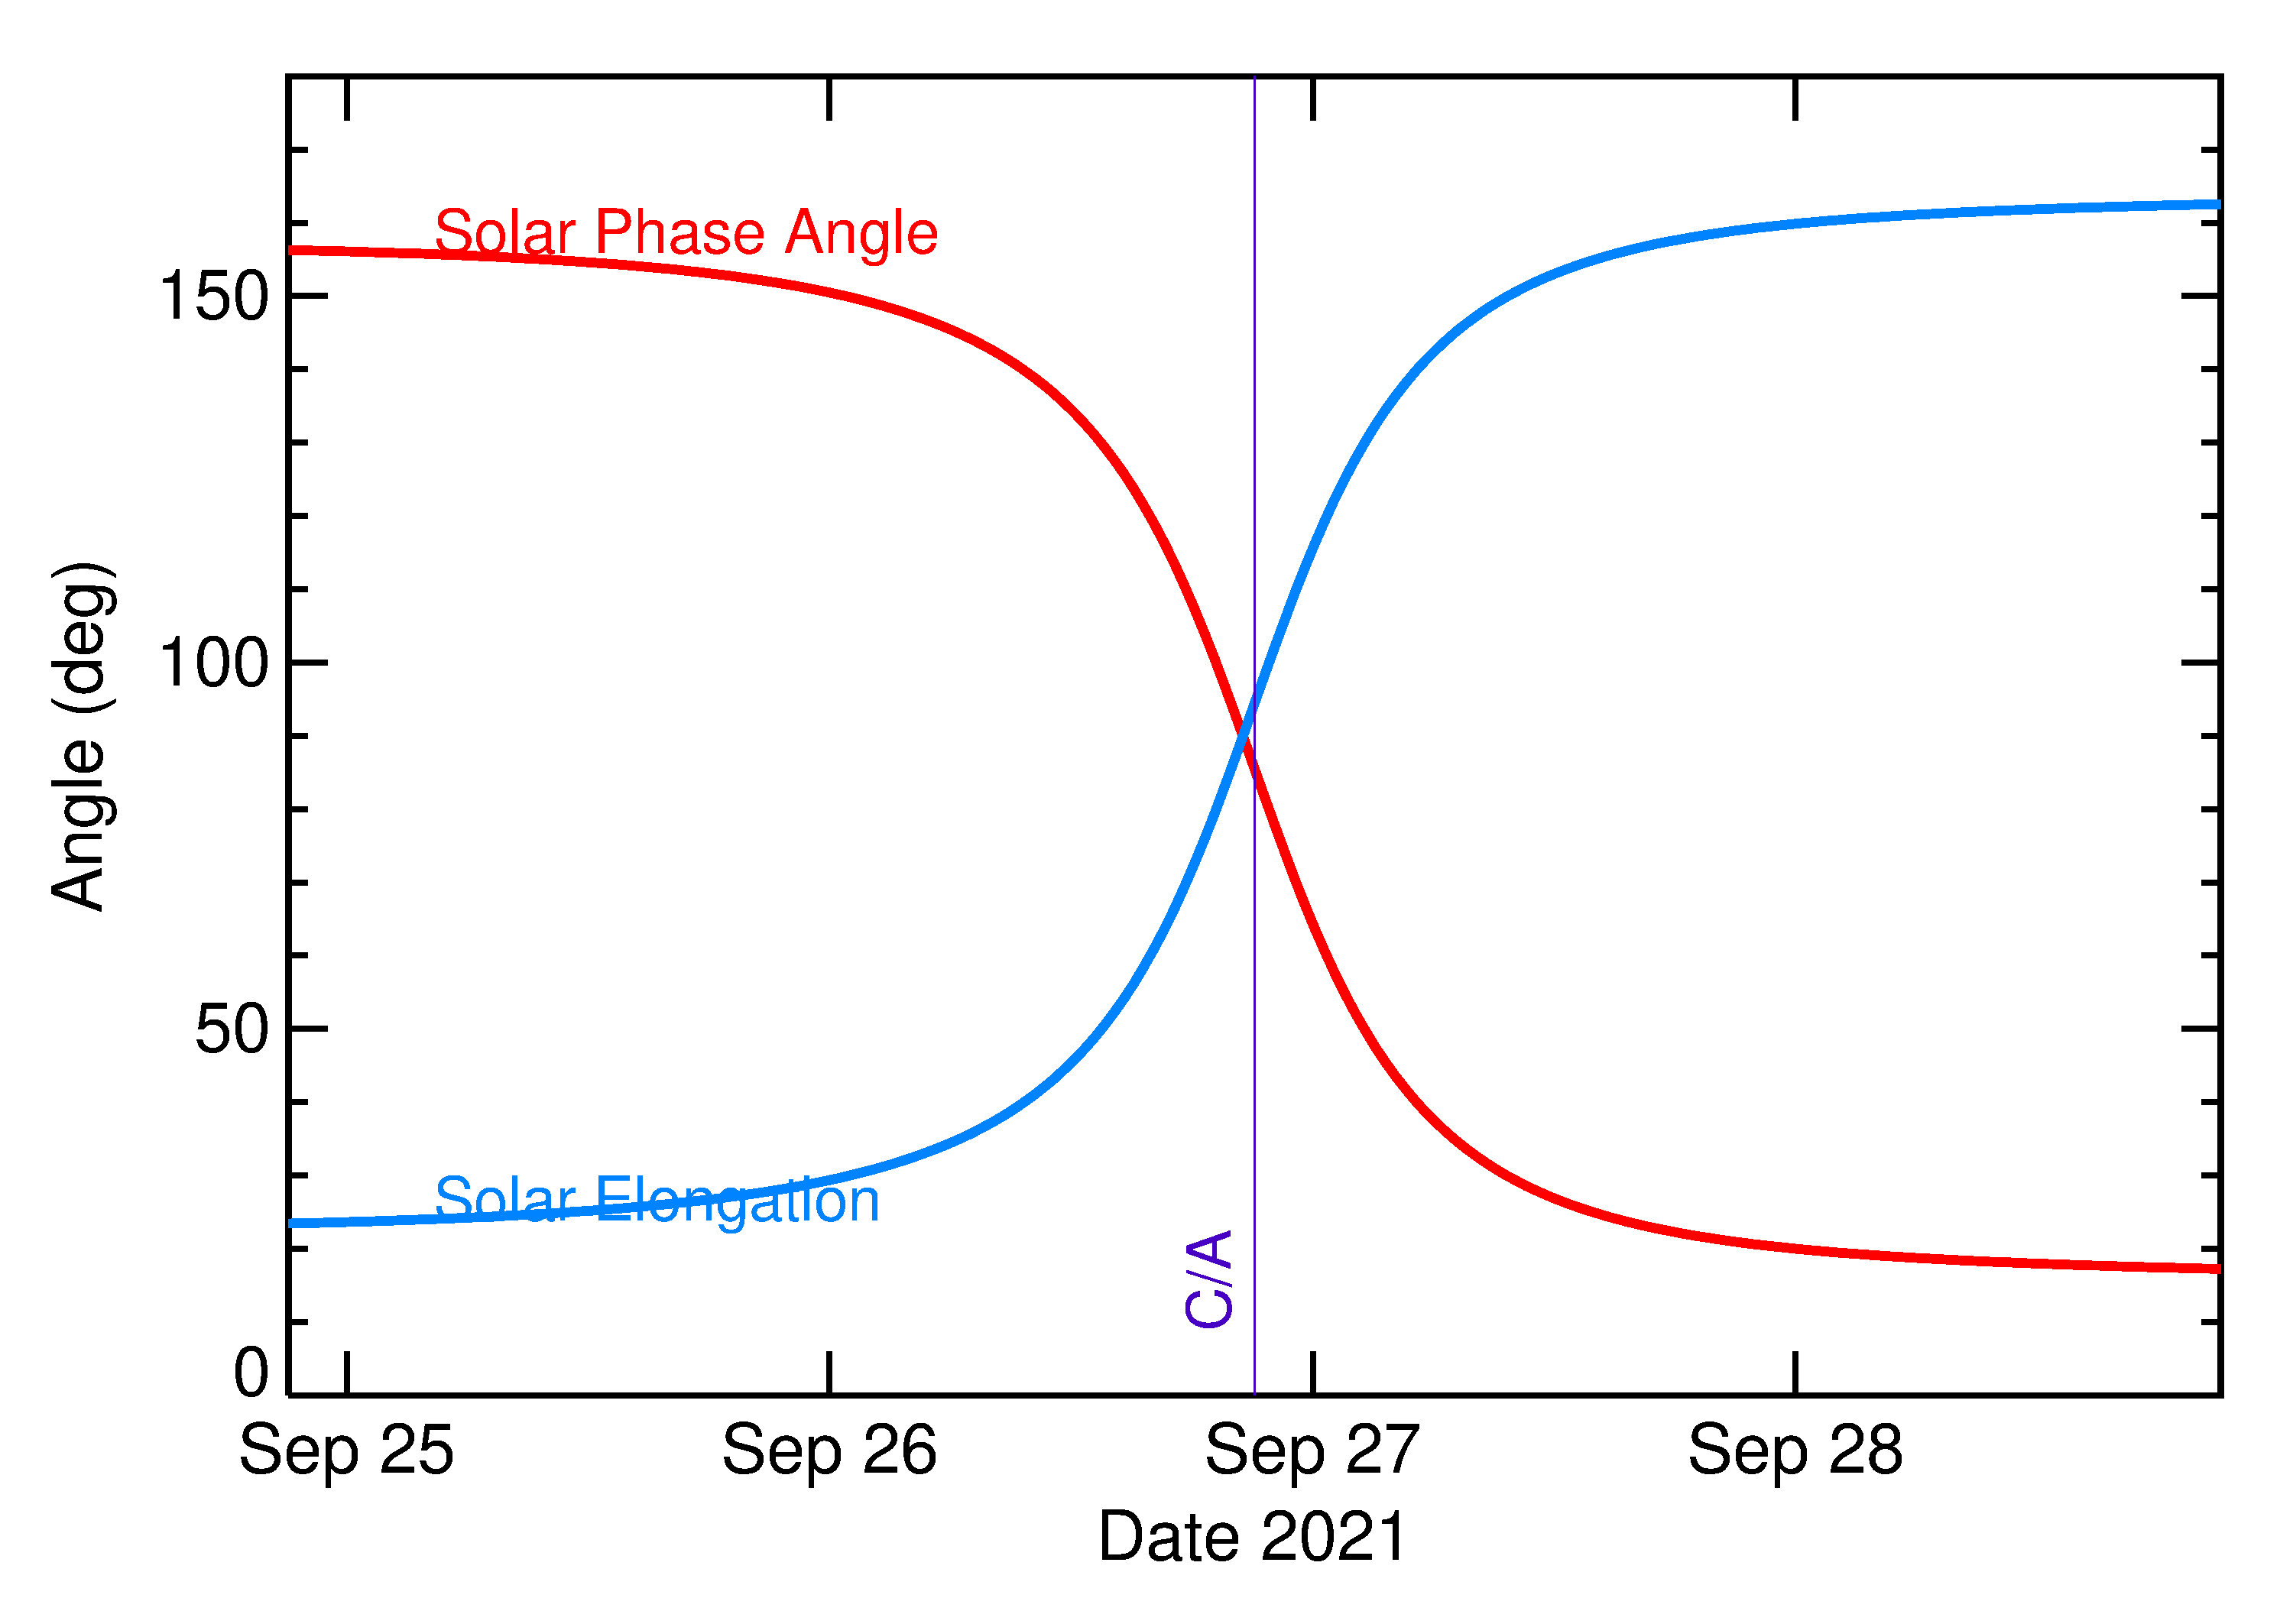 Solar Elongation and Solar Phase Angle of 2021 SW1 in the days around closest approach